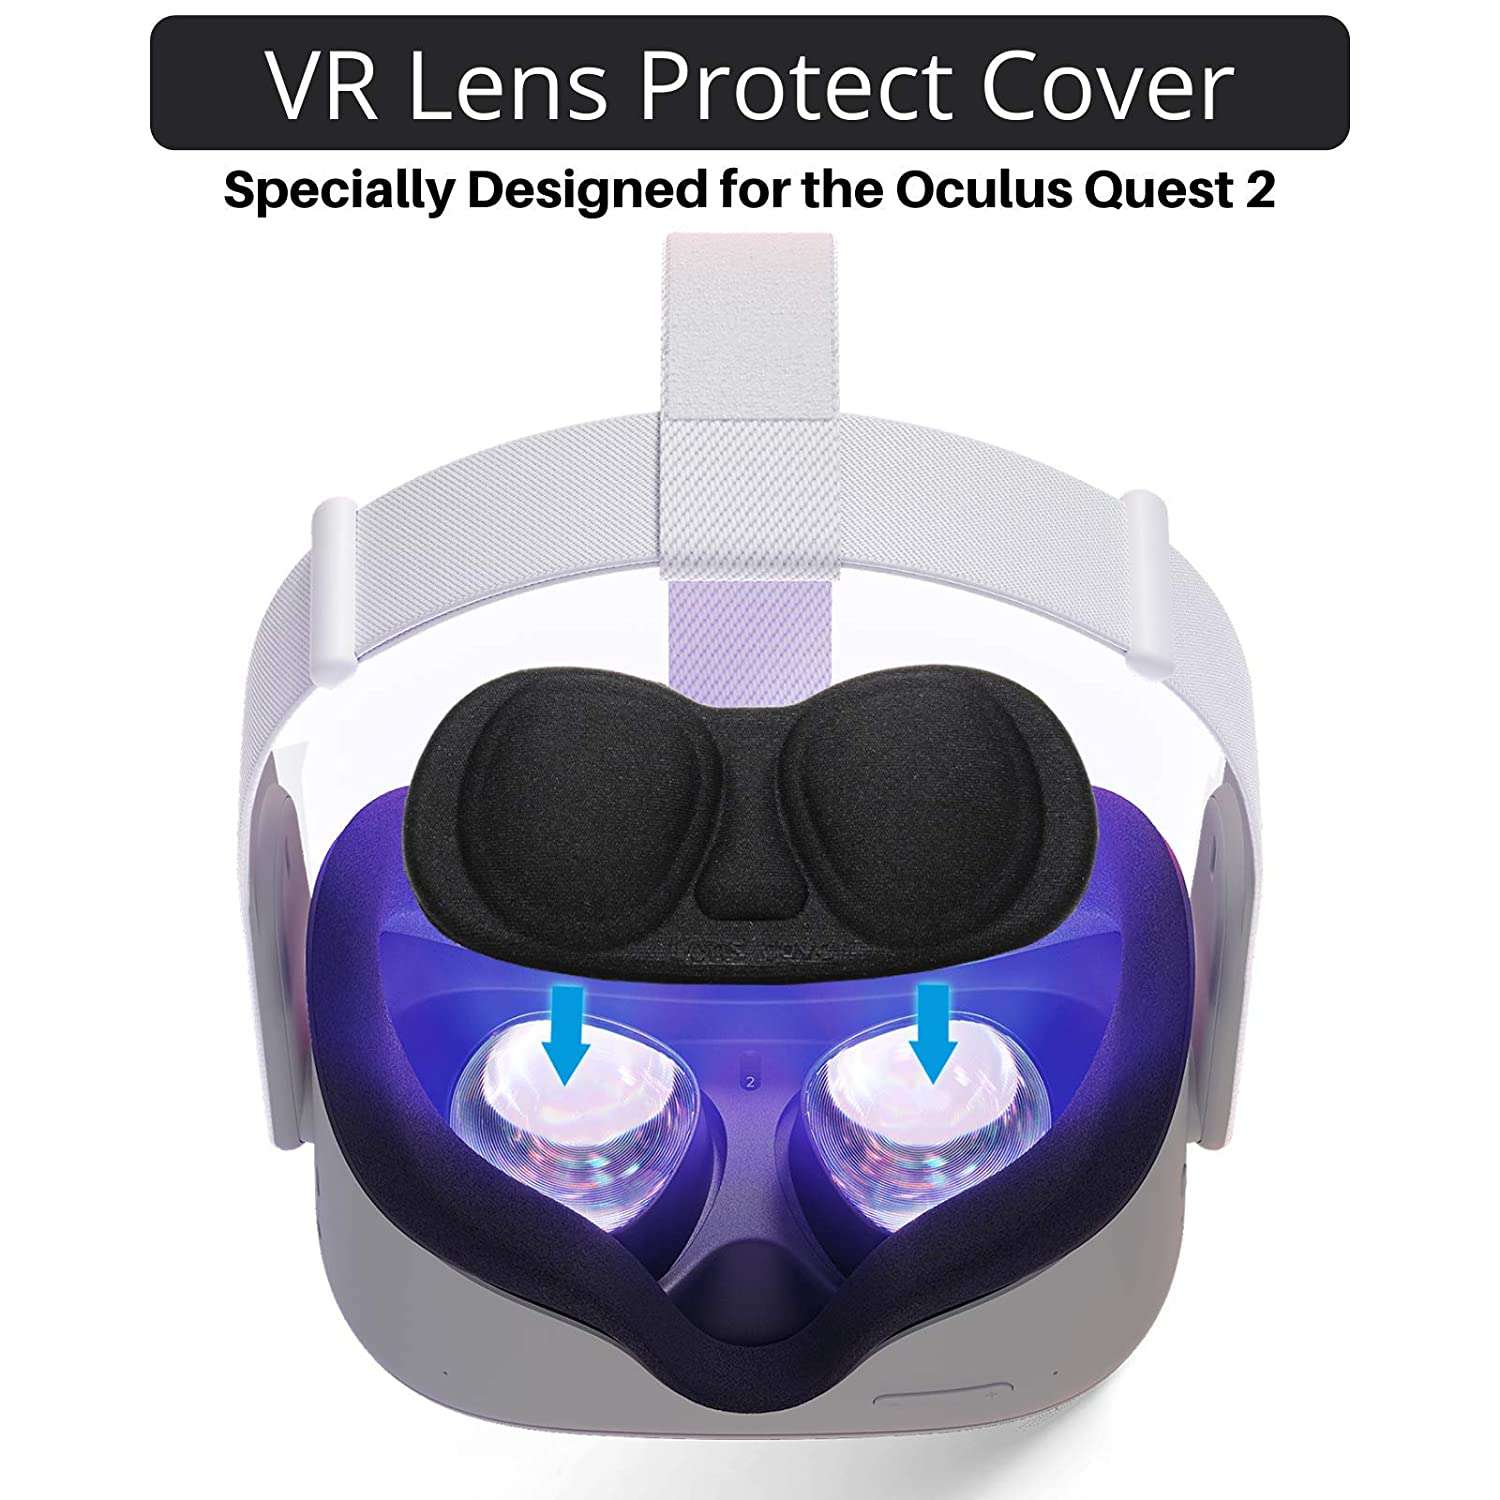 The VR Lens Protect Cover is specifically designed for the Oculus Quest 2